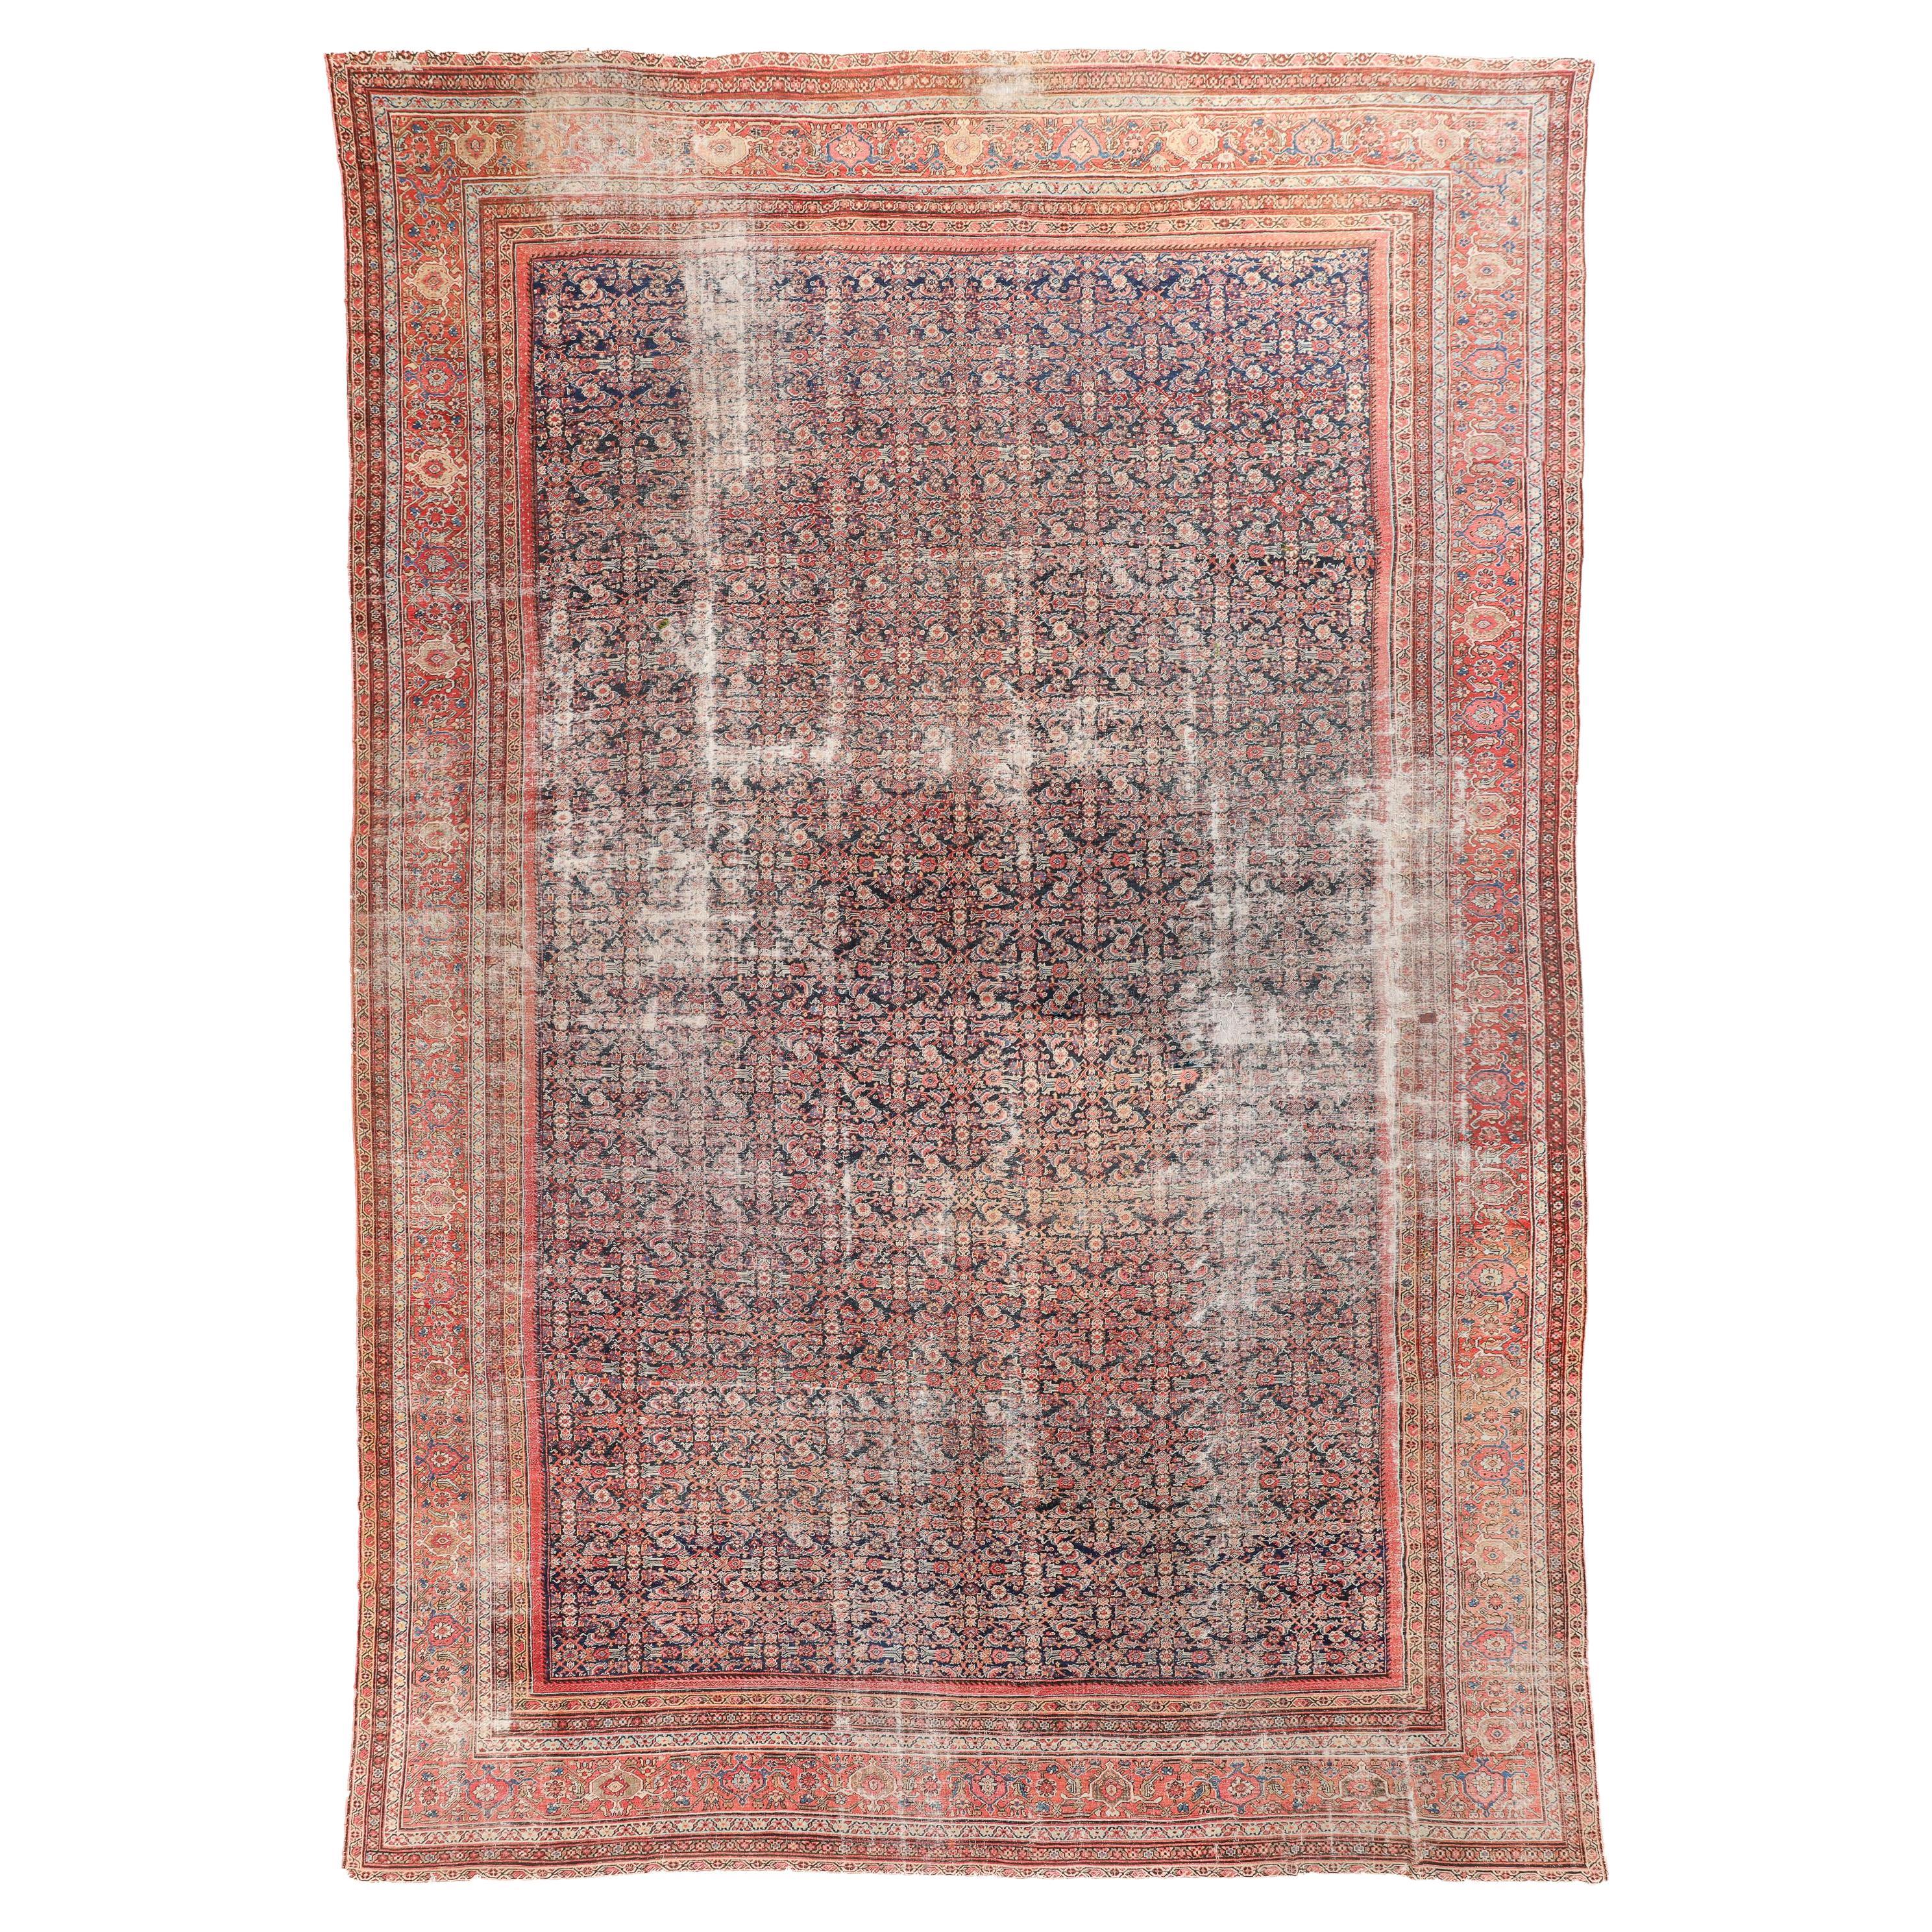 Palace Size Gorgeous Antique Sultanabad Rug 16x24 CIrca 1900s